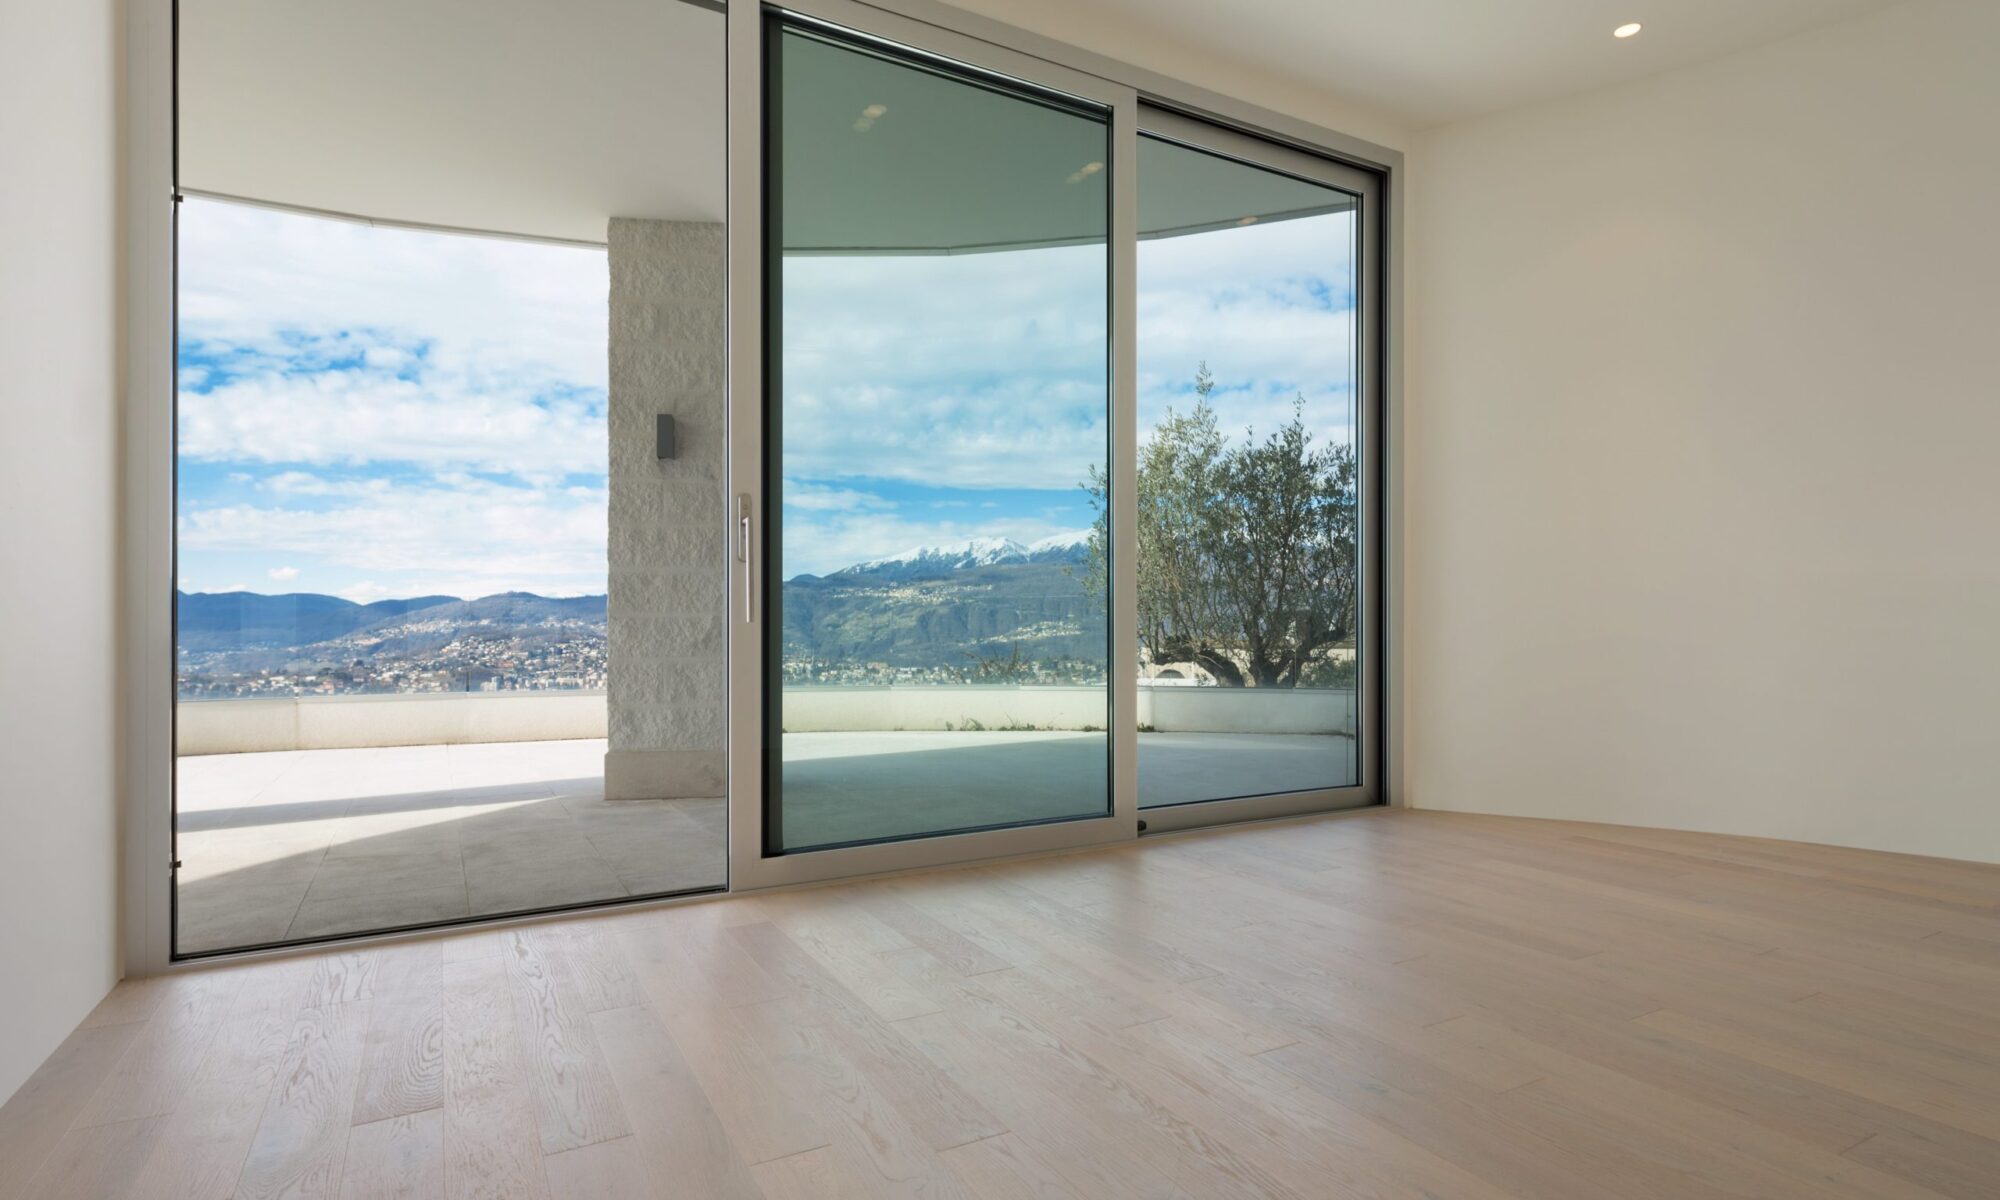 Tips to choose the Aluminum sliding door for your Balcony